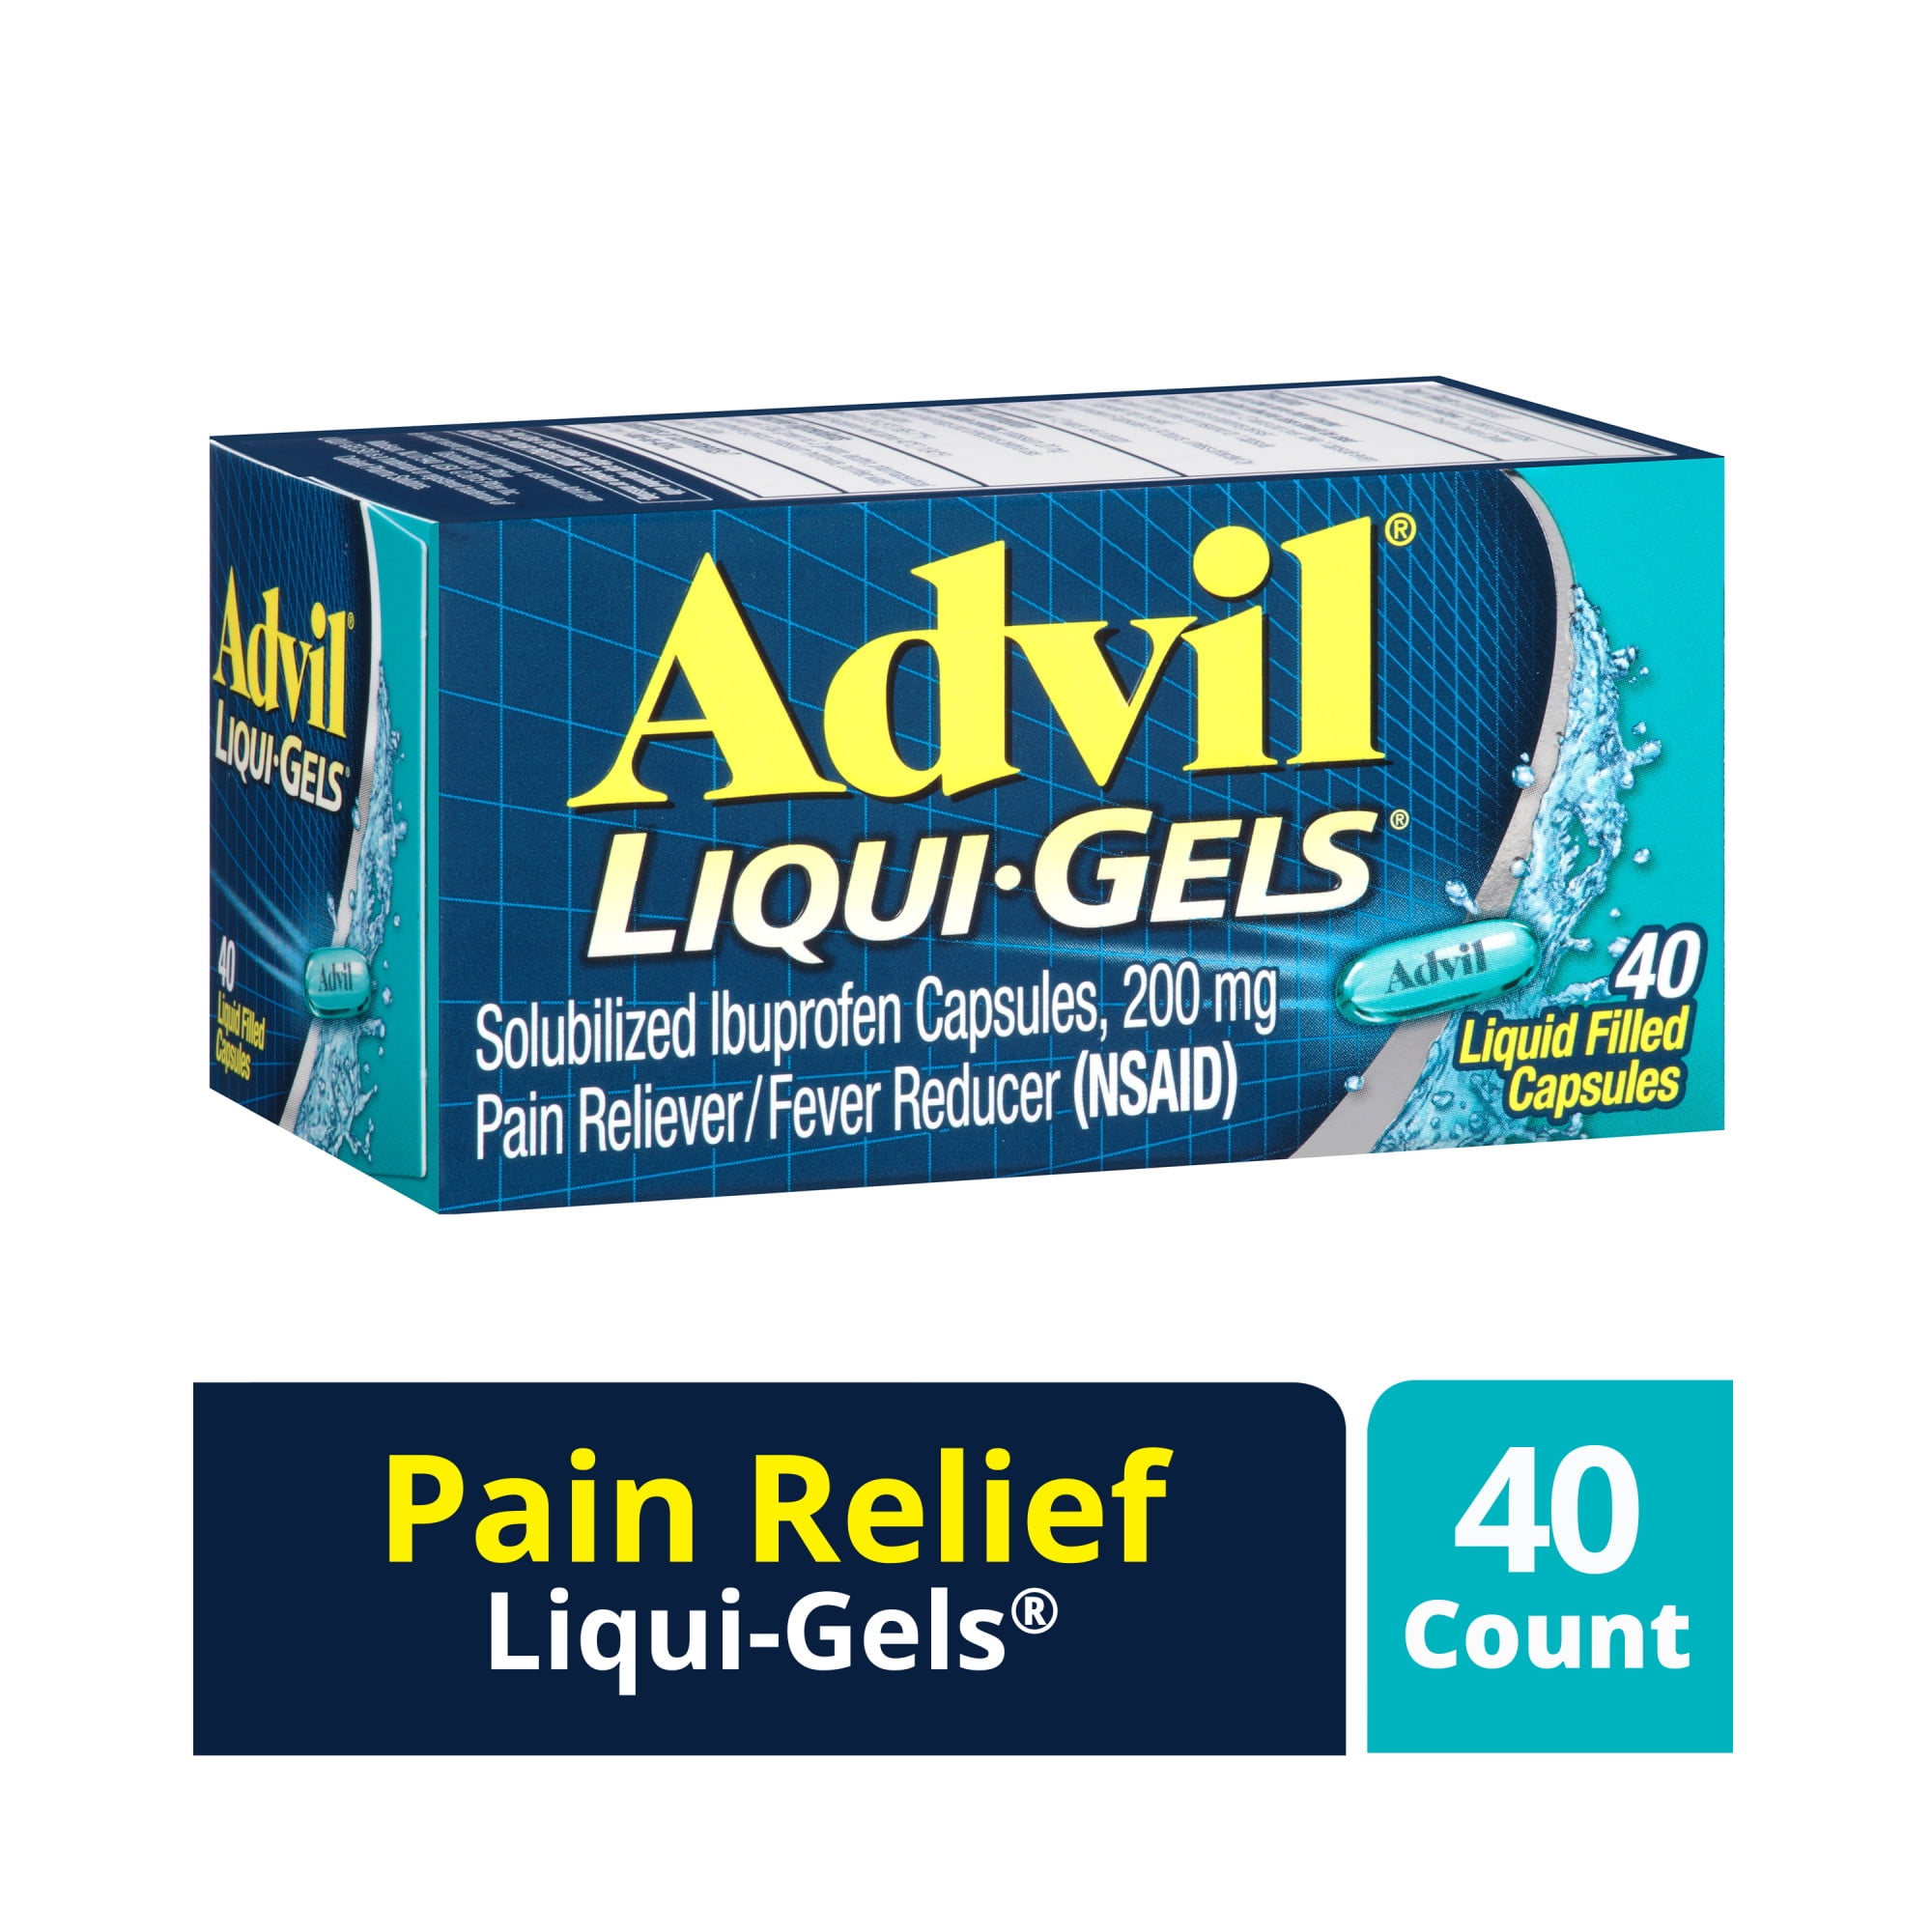 Advil Menstrual (40 Count) Pain Reliever / Fever Reducer Tablet, 200mg  Ibuprofen Sodium, Menstrual Cramps, Temporary Pain Relief 